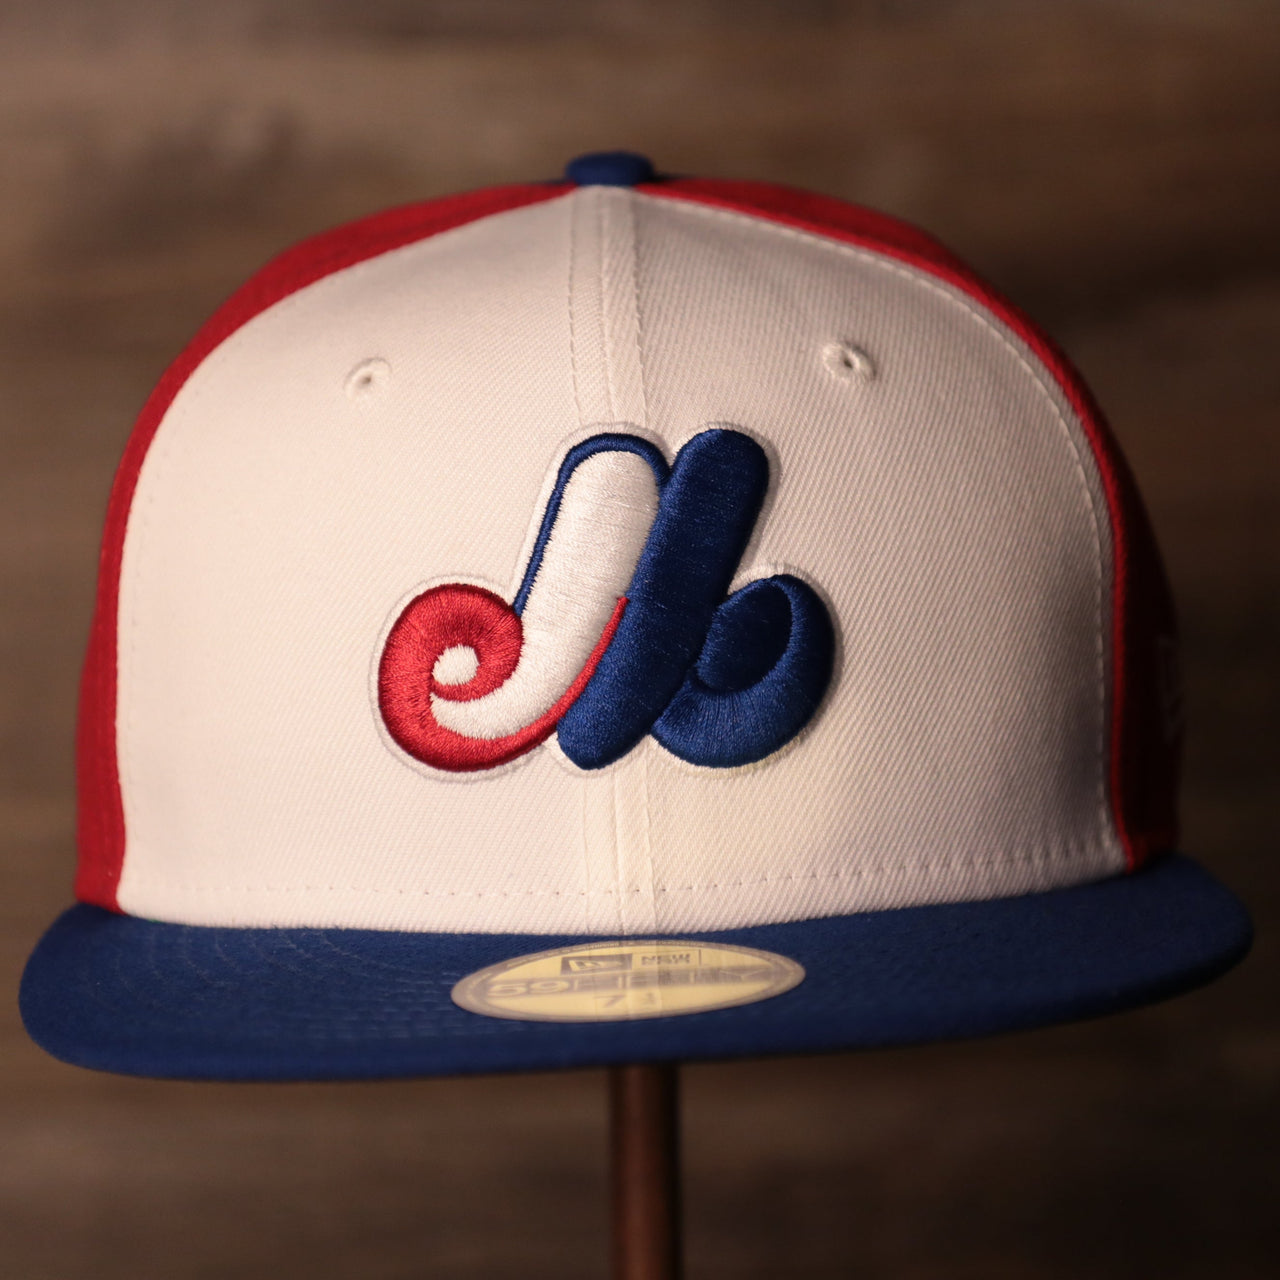 The front side of this New Era 59fifty has the logo of the Montreal Expos in white, red and blue.